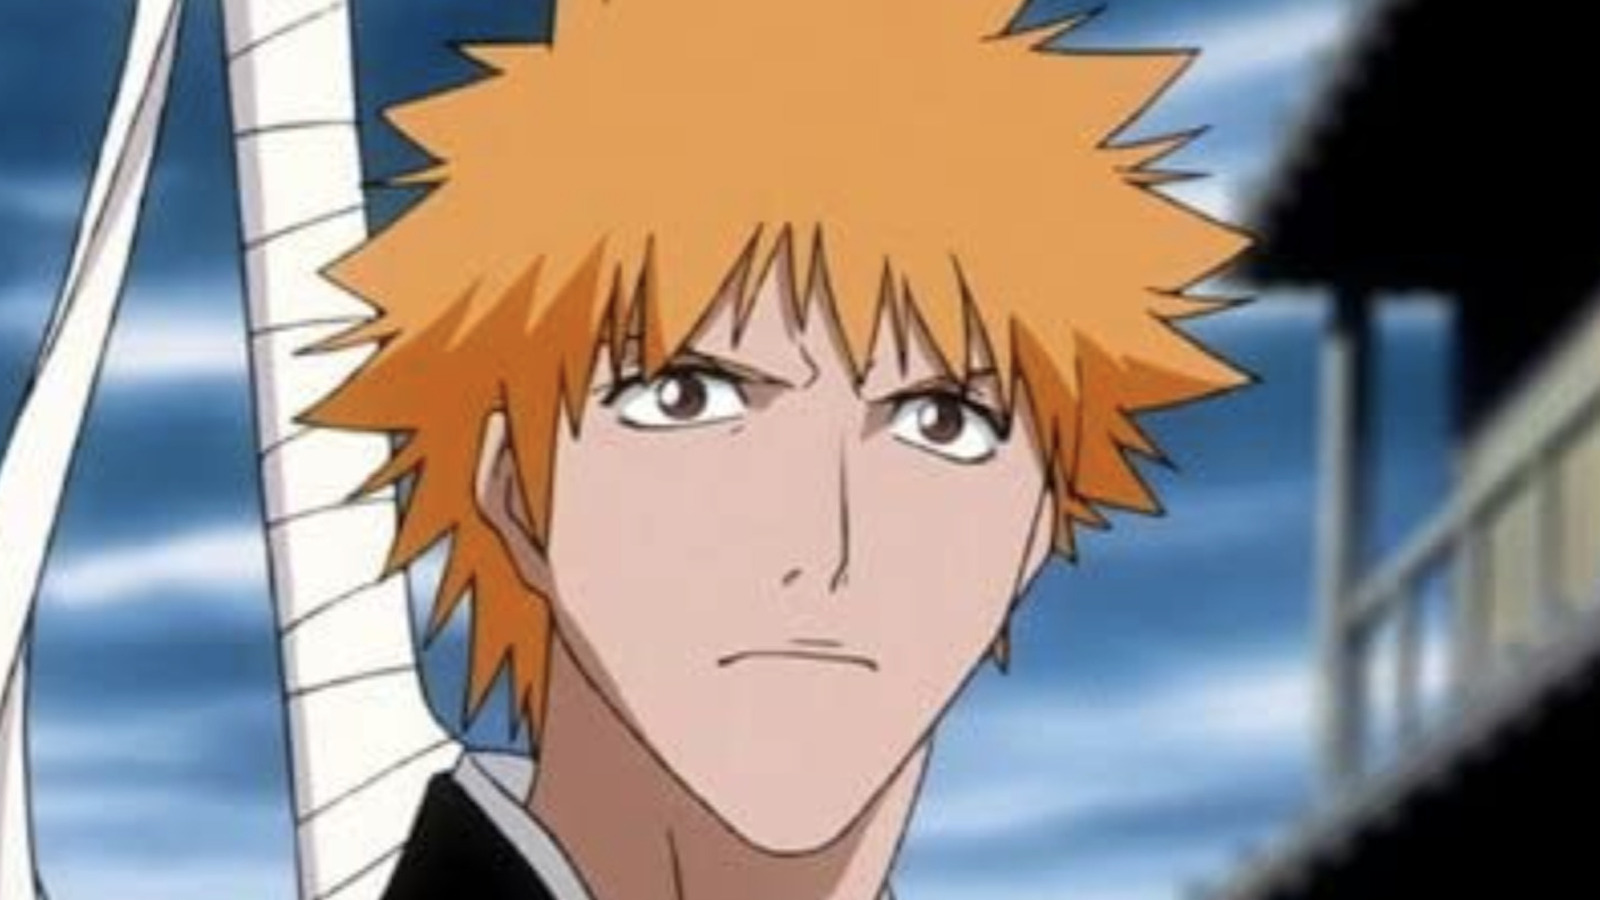 The Worst Character In Bleach According To Fans